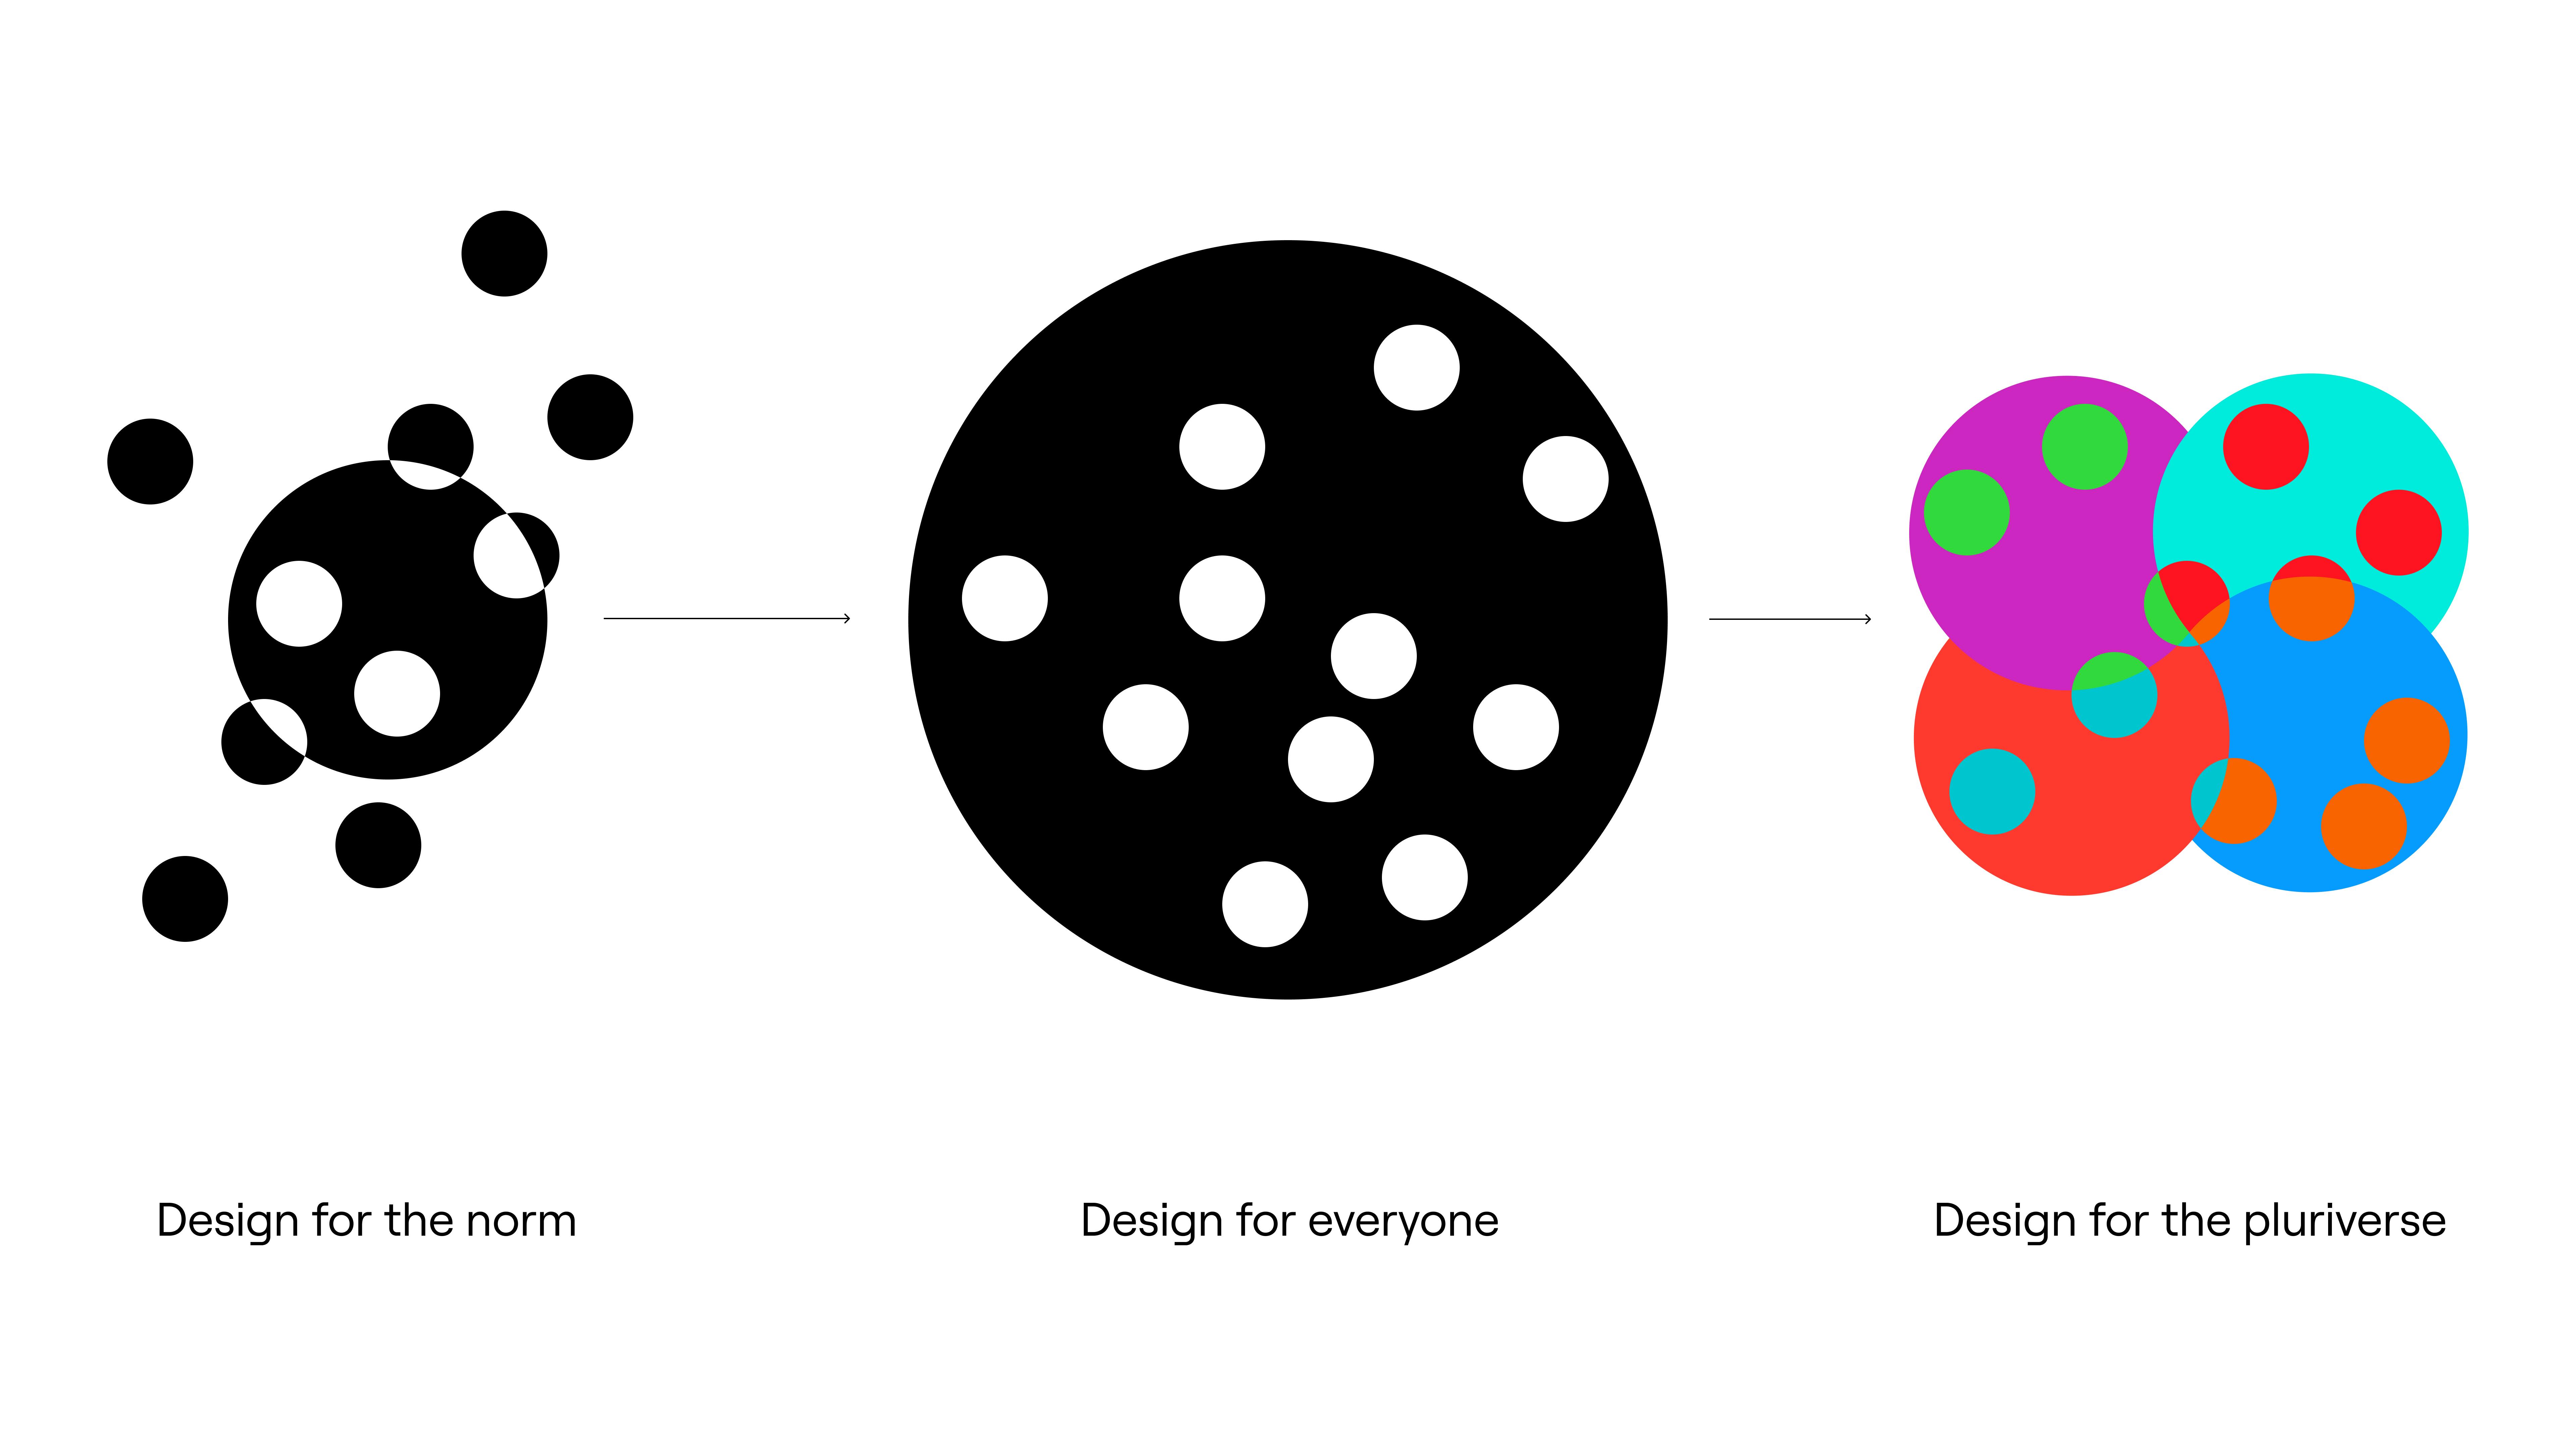 diagram  showing that design for the norm excludes design for everyone imposes a standard and design for pluriverse allow differences to coexist represented by different colors and overlapping circles